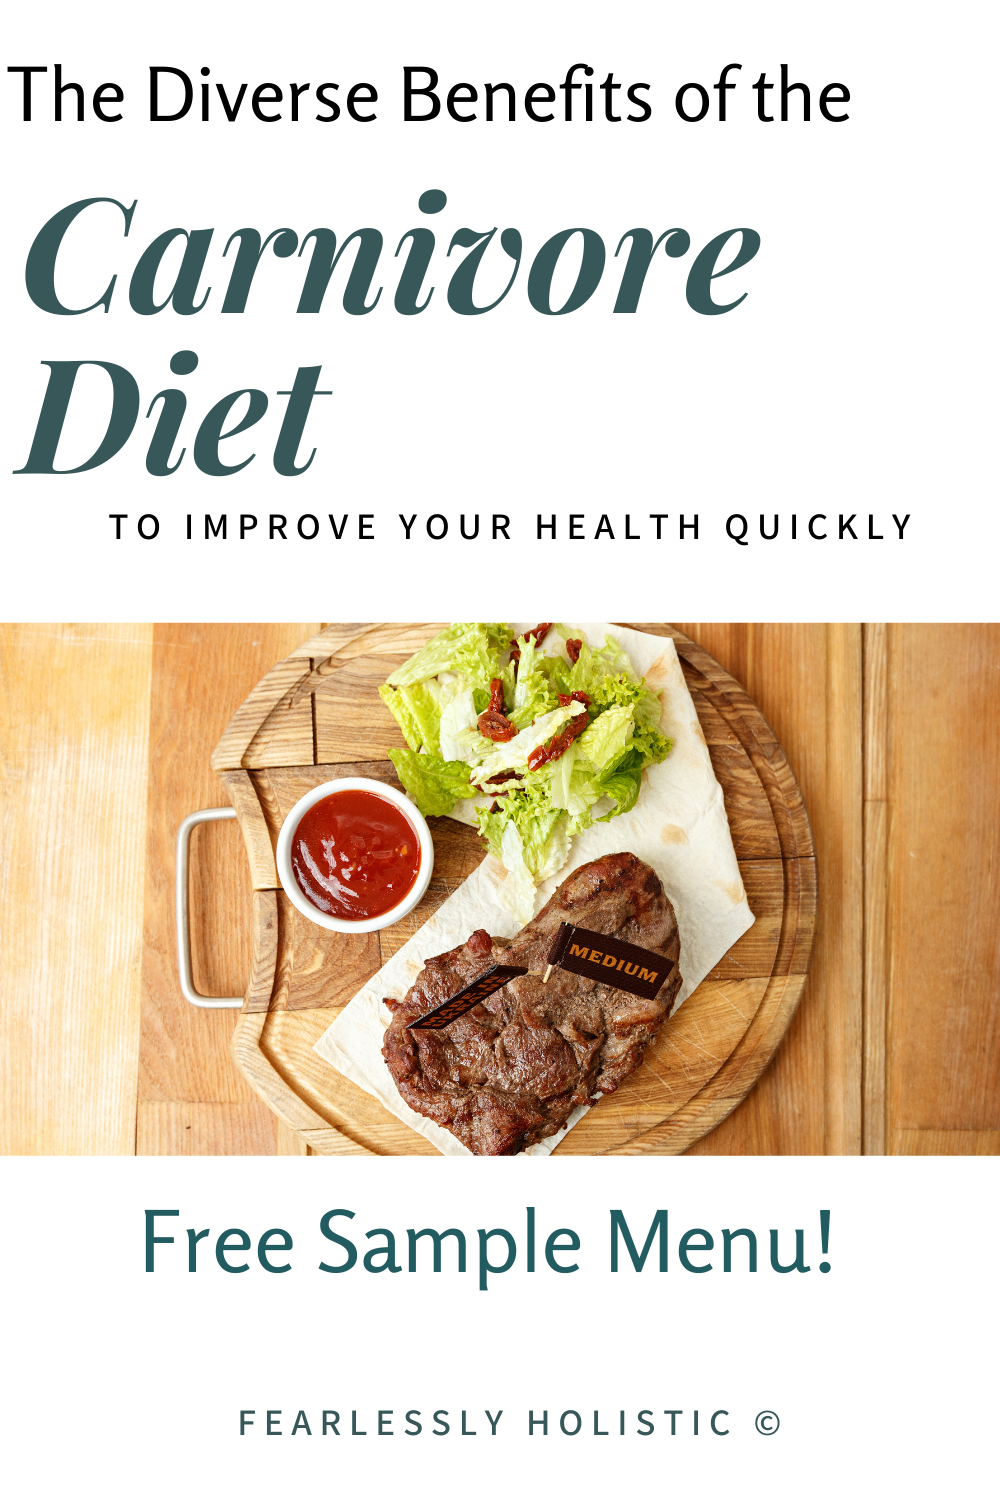 The Benefits of A Carnivore Diet w/ Sample Menus